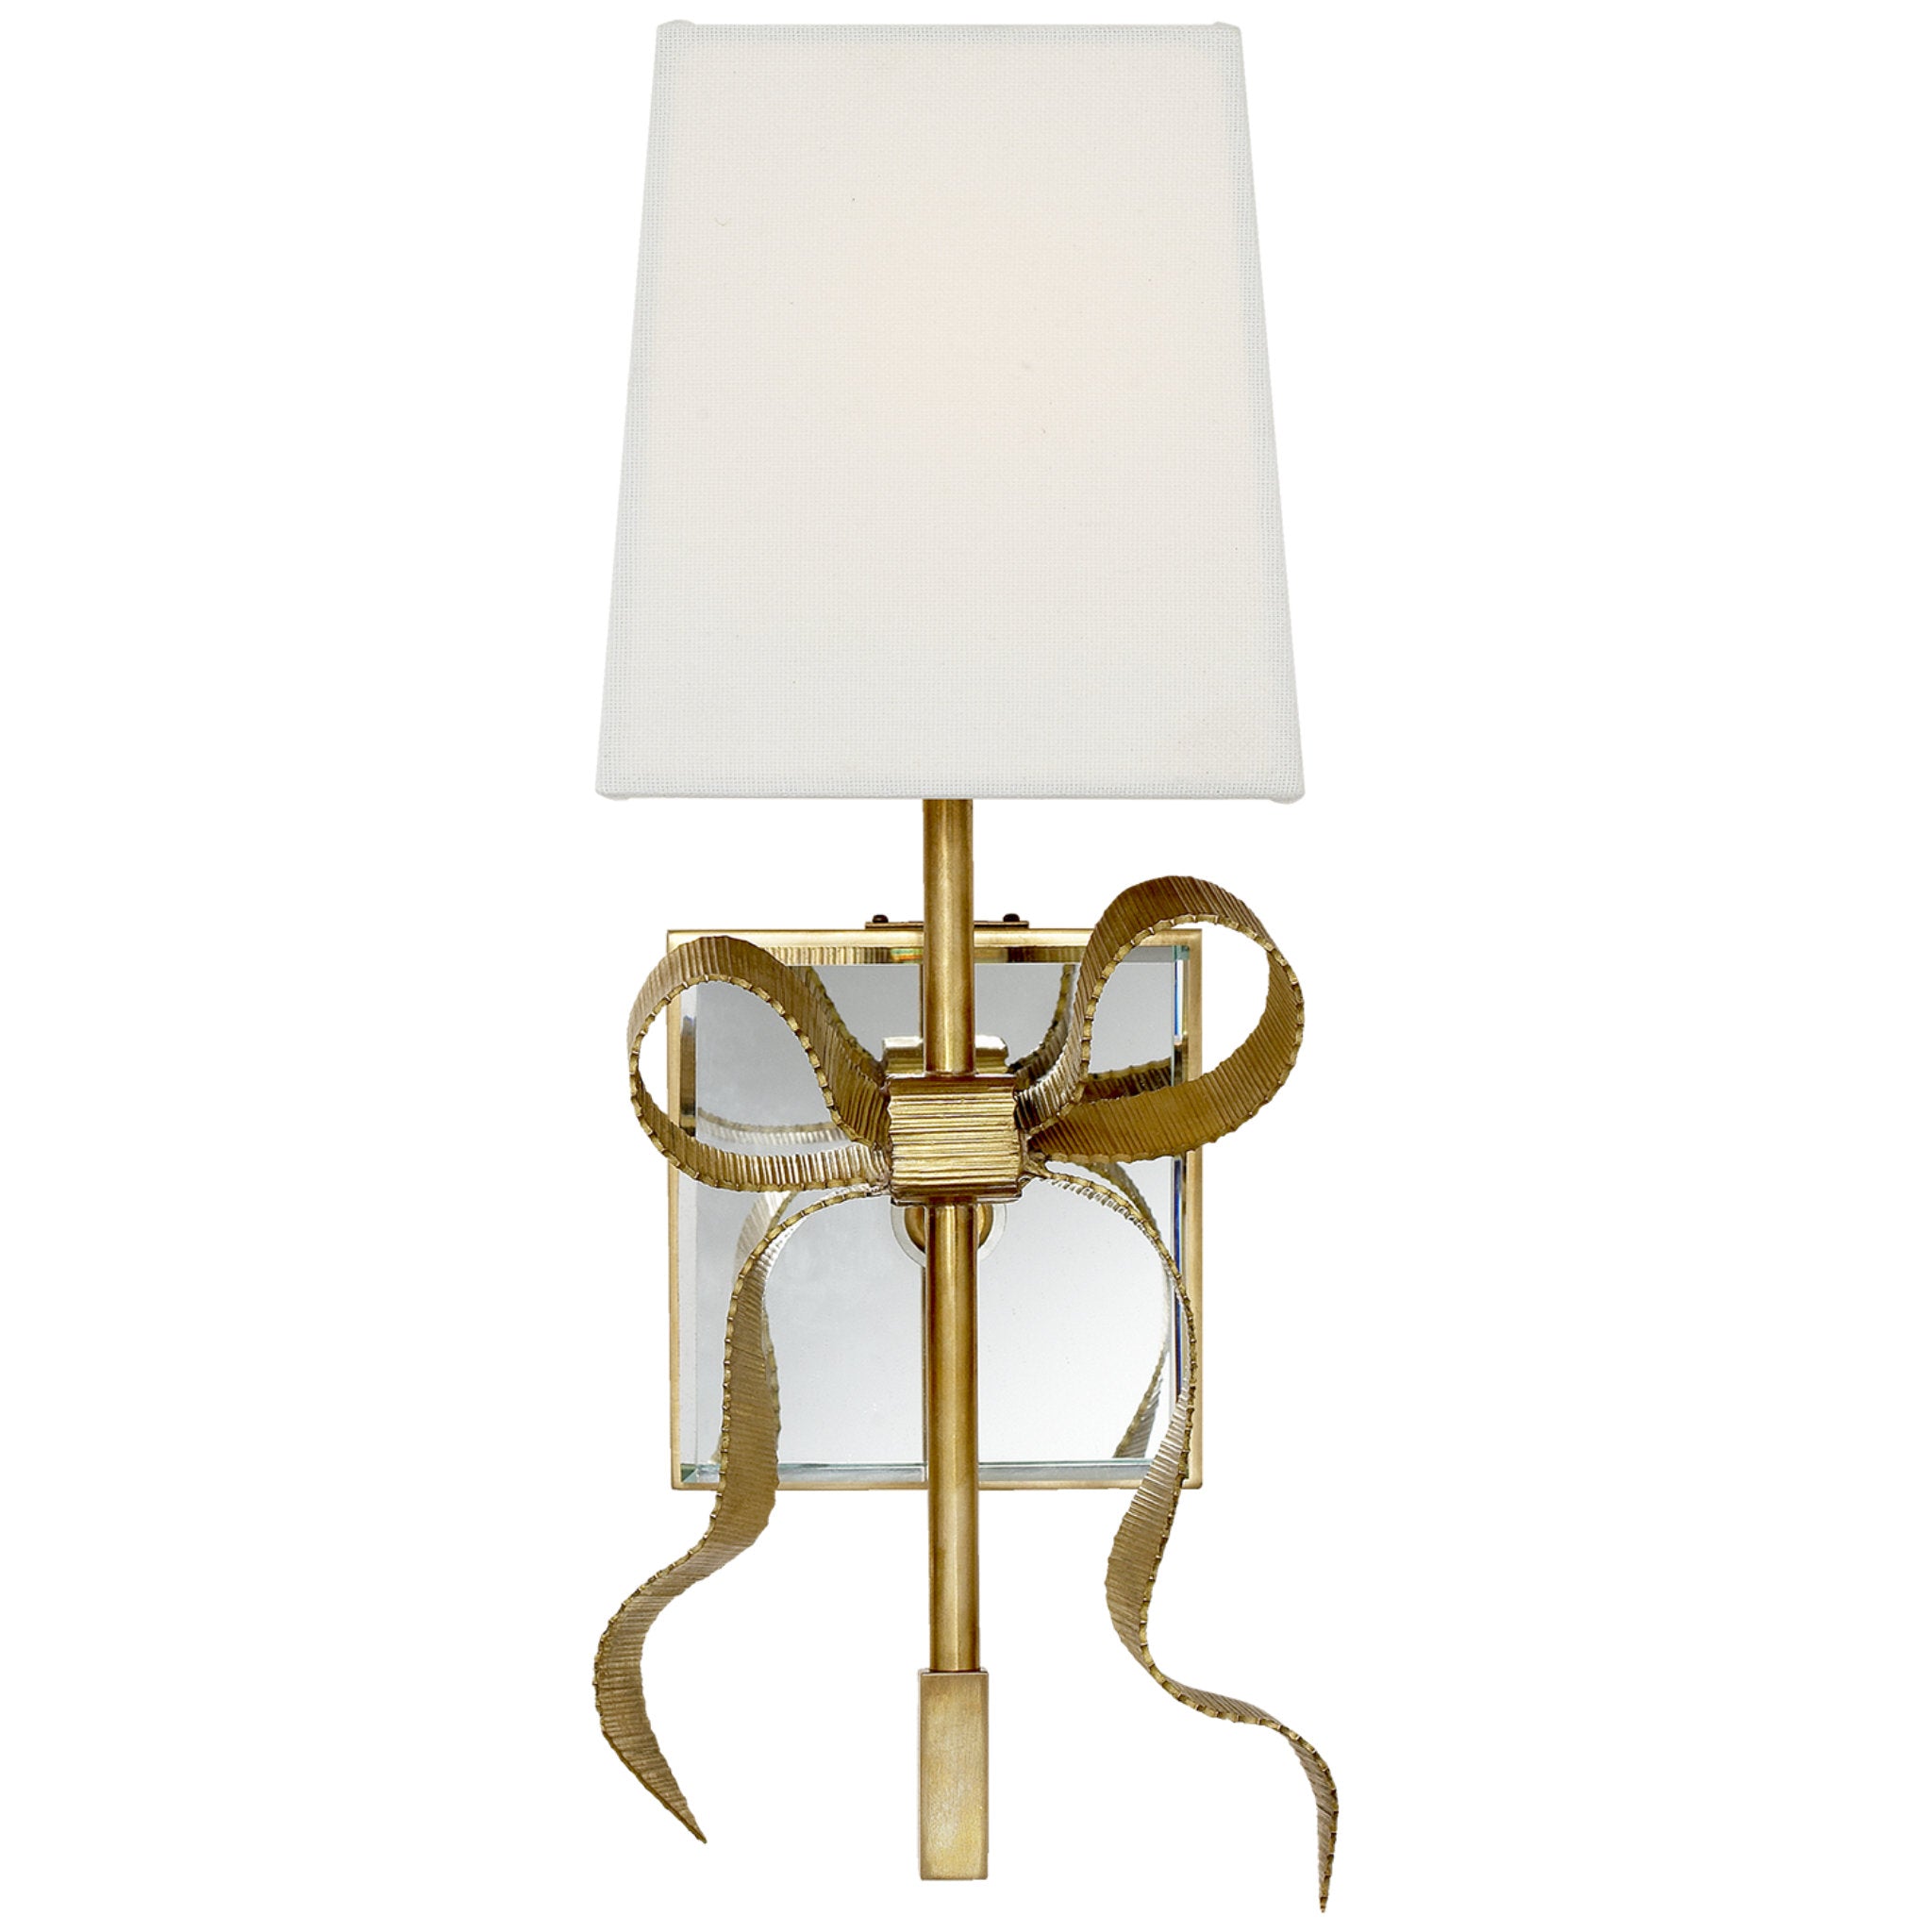 kate spade new york Ellery Gros-Grain Bow Small Sconce in Soft Brass with Cream Linen Shade